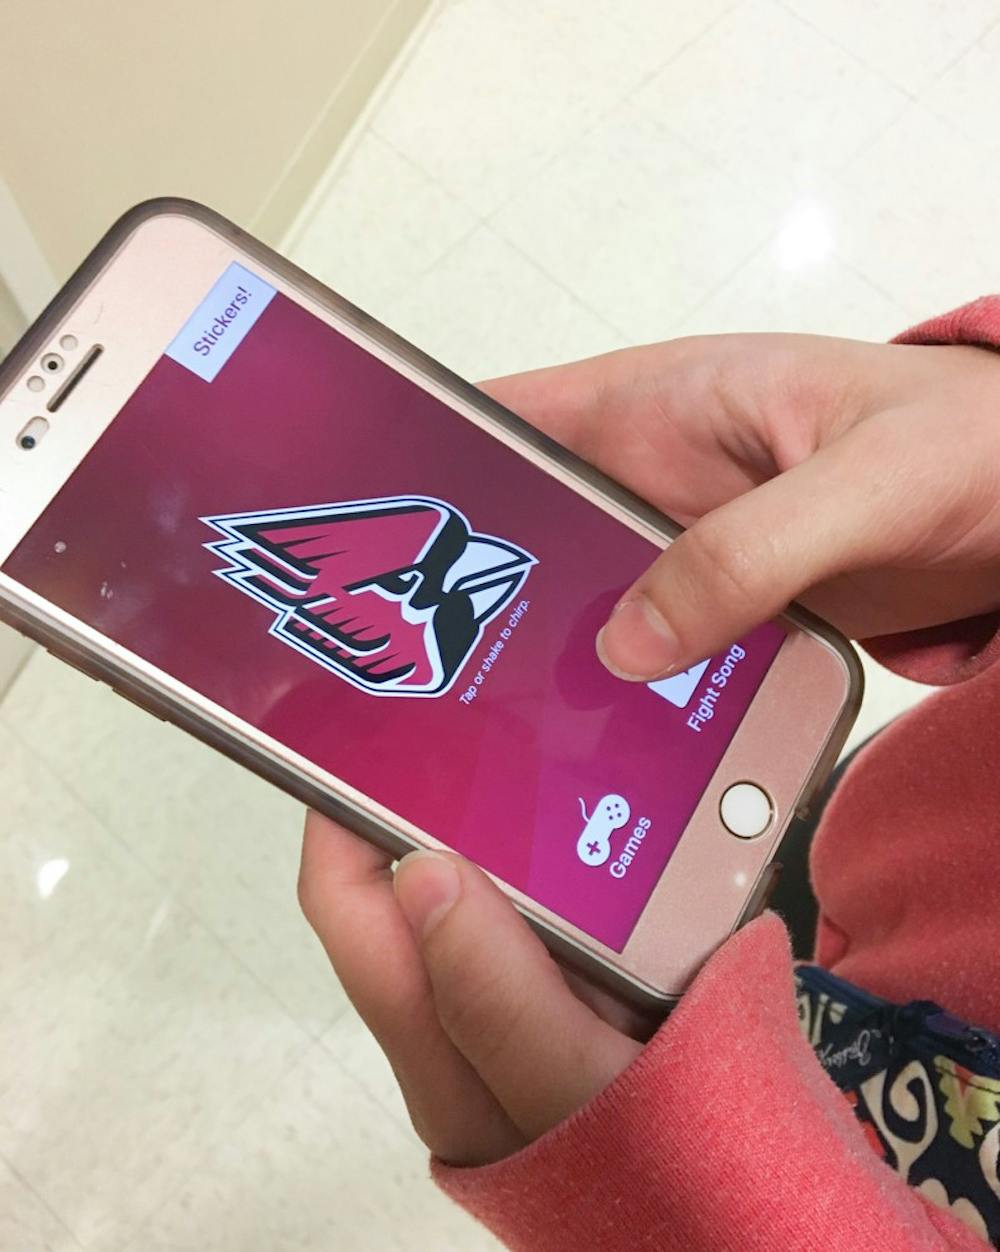 The new Chirper app, which chirps like a cardinal, has become popular on Ball State's campus. Michaela Kelley, DN